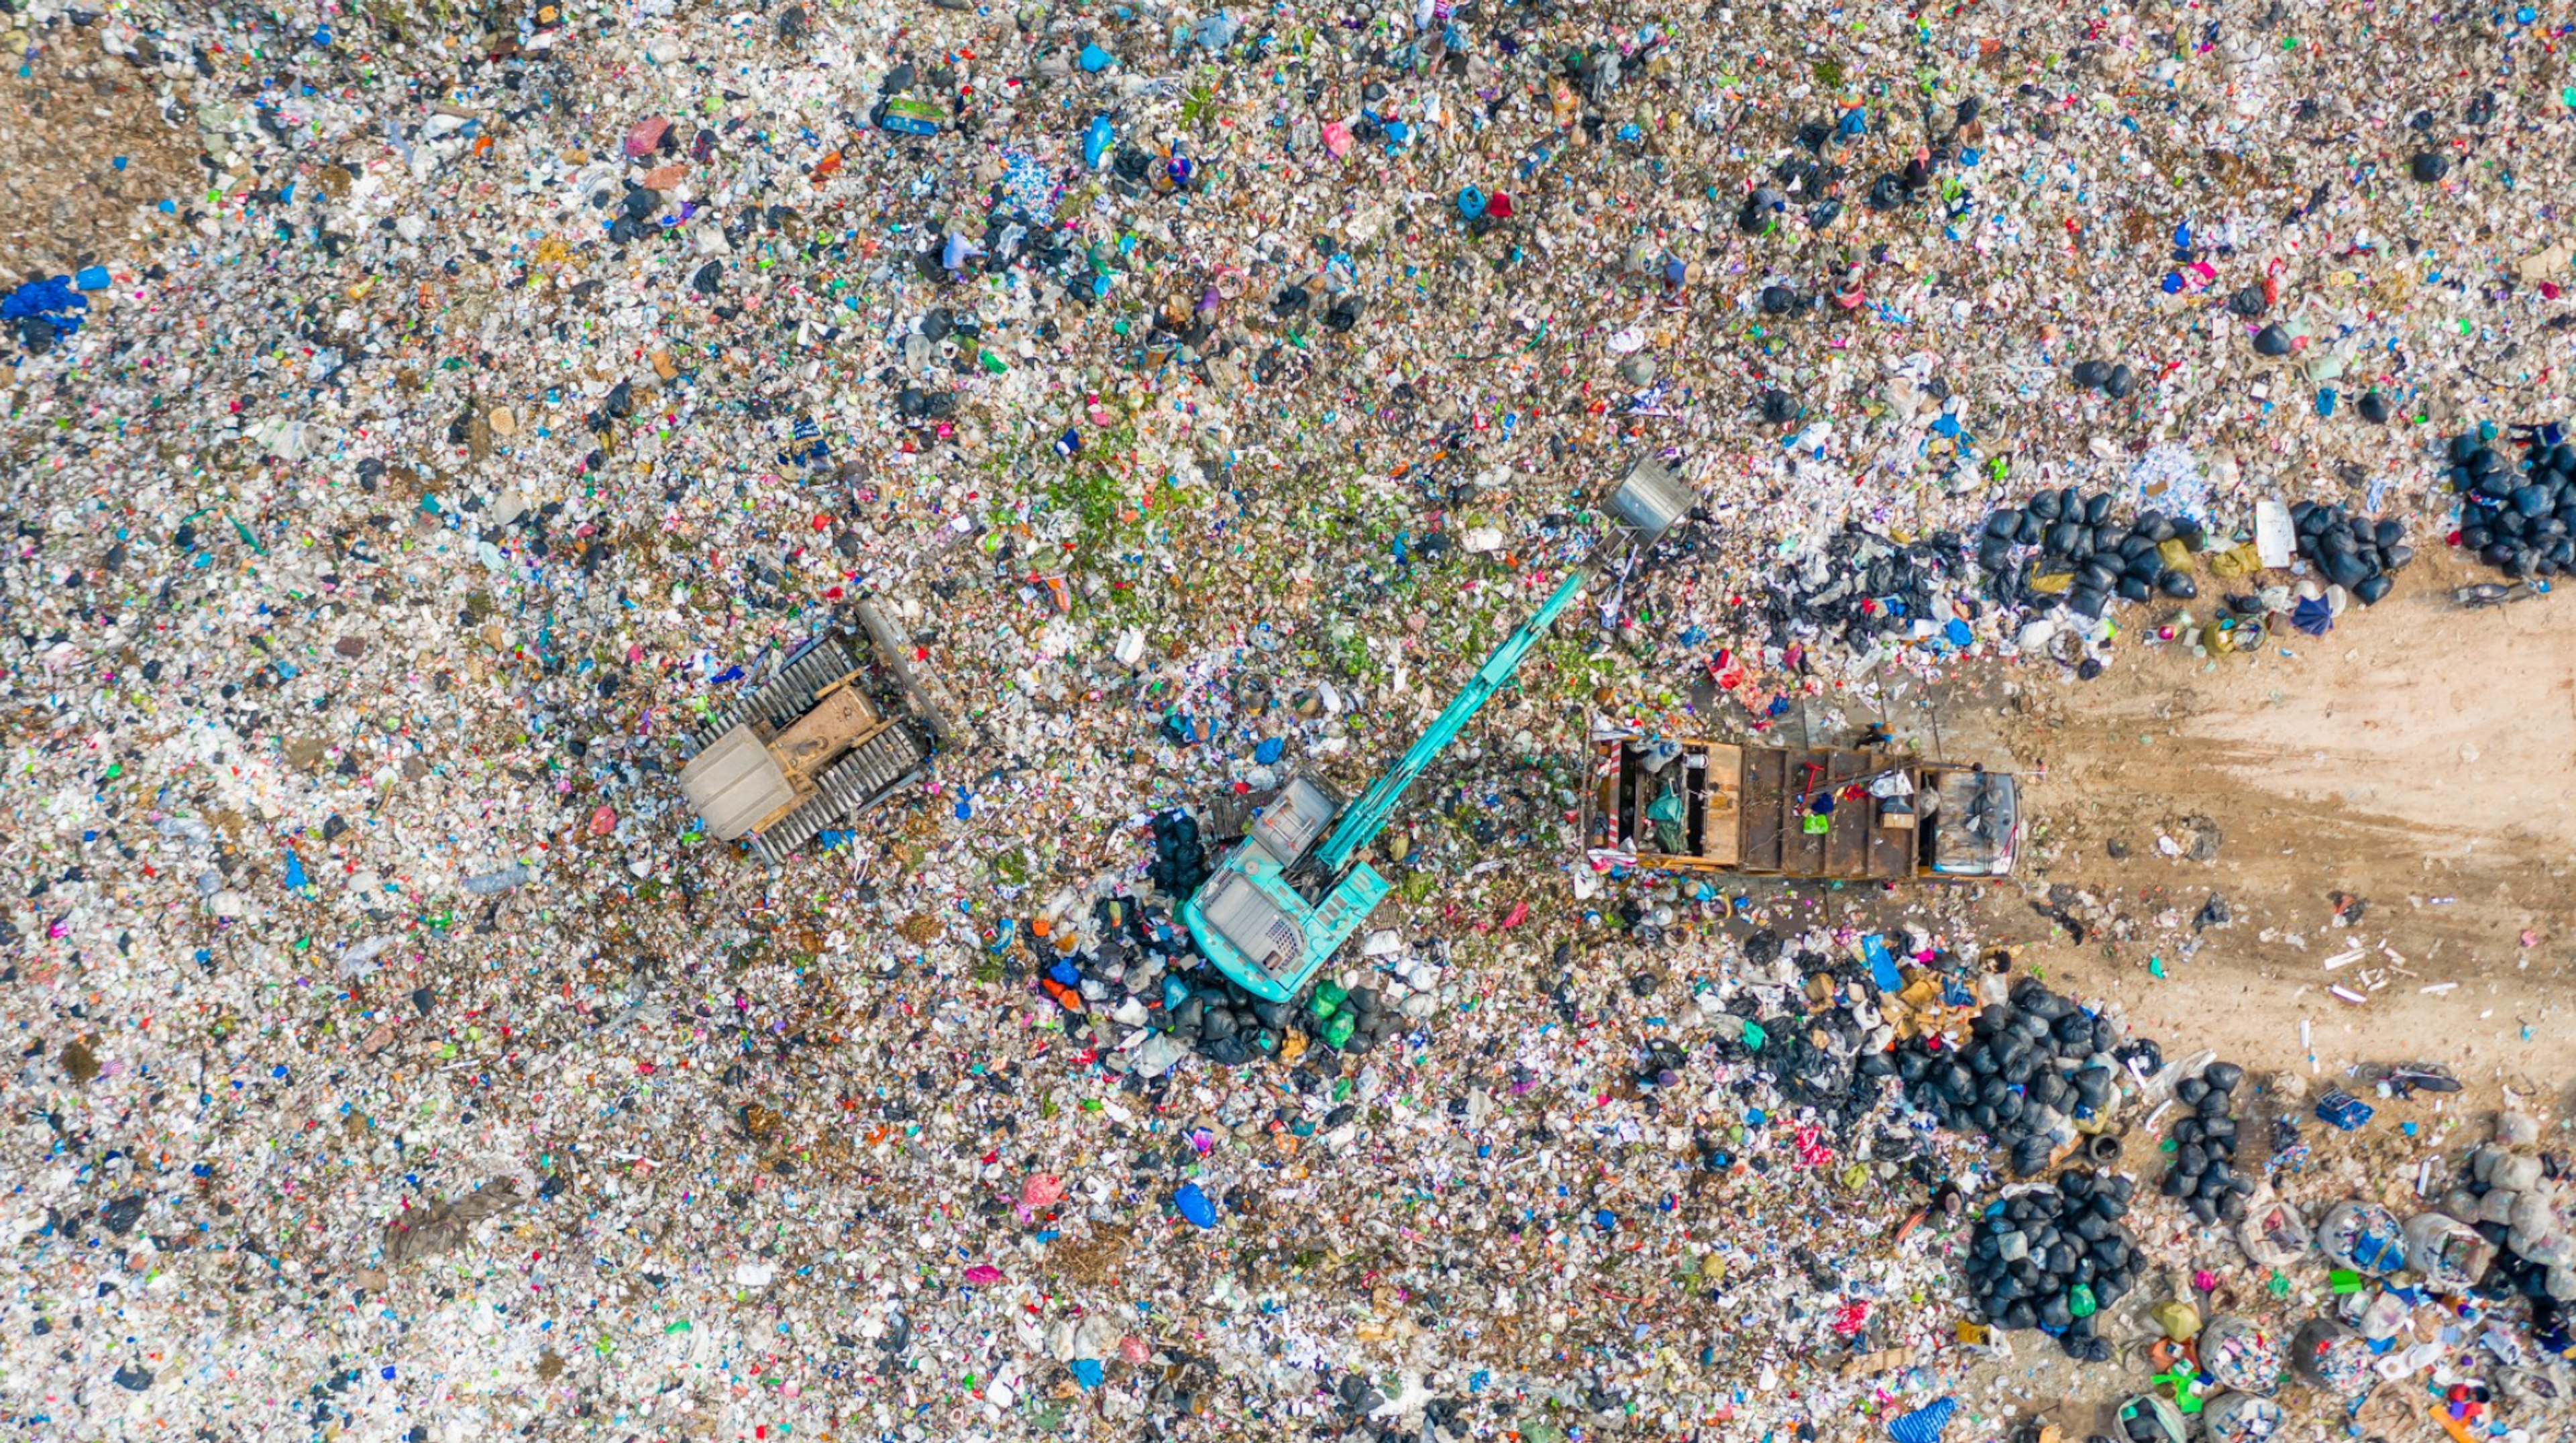 Texas Landfill Study Gathers Large Scale of Quality Data on a Limited Budget